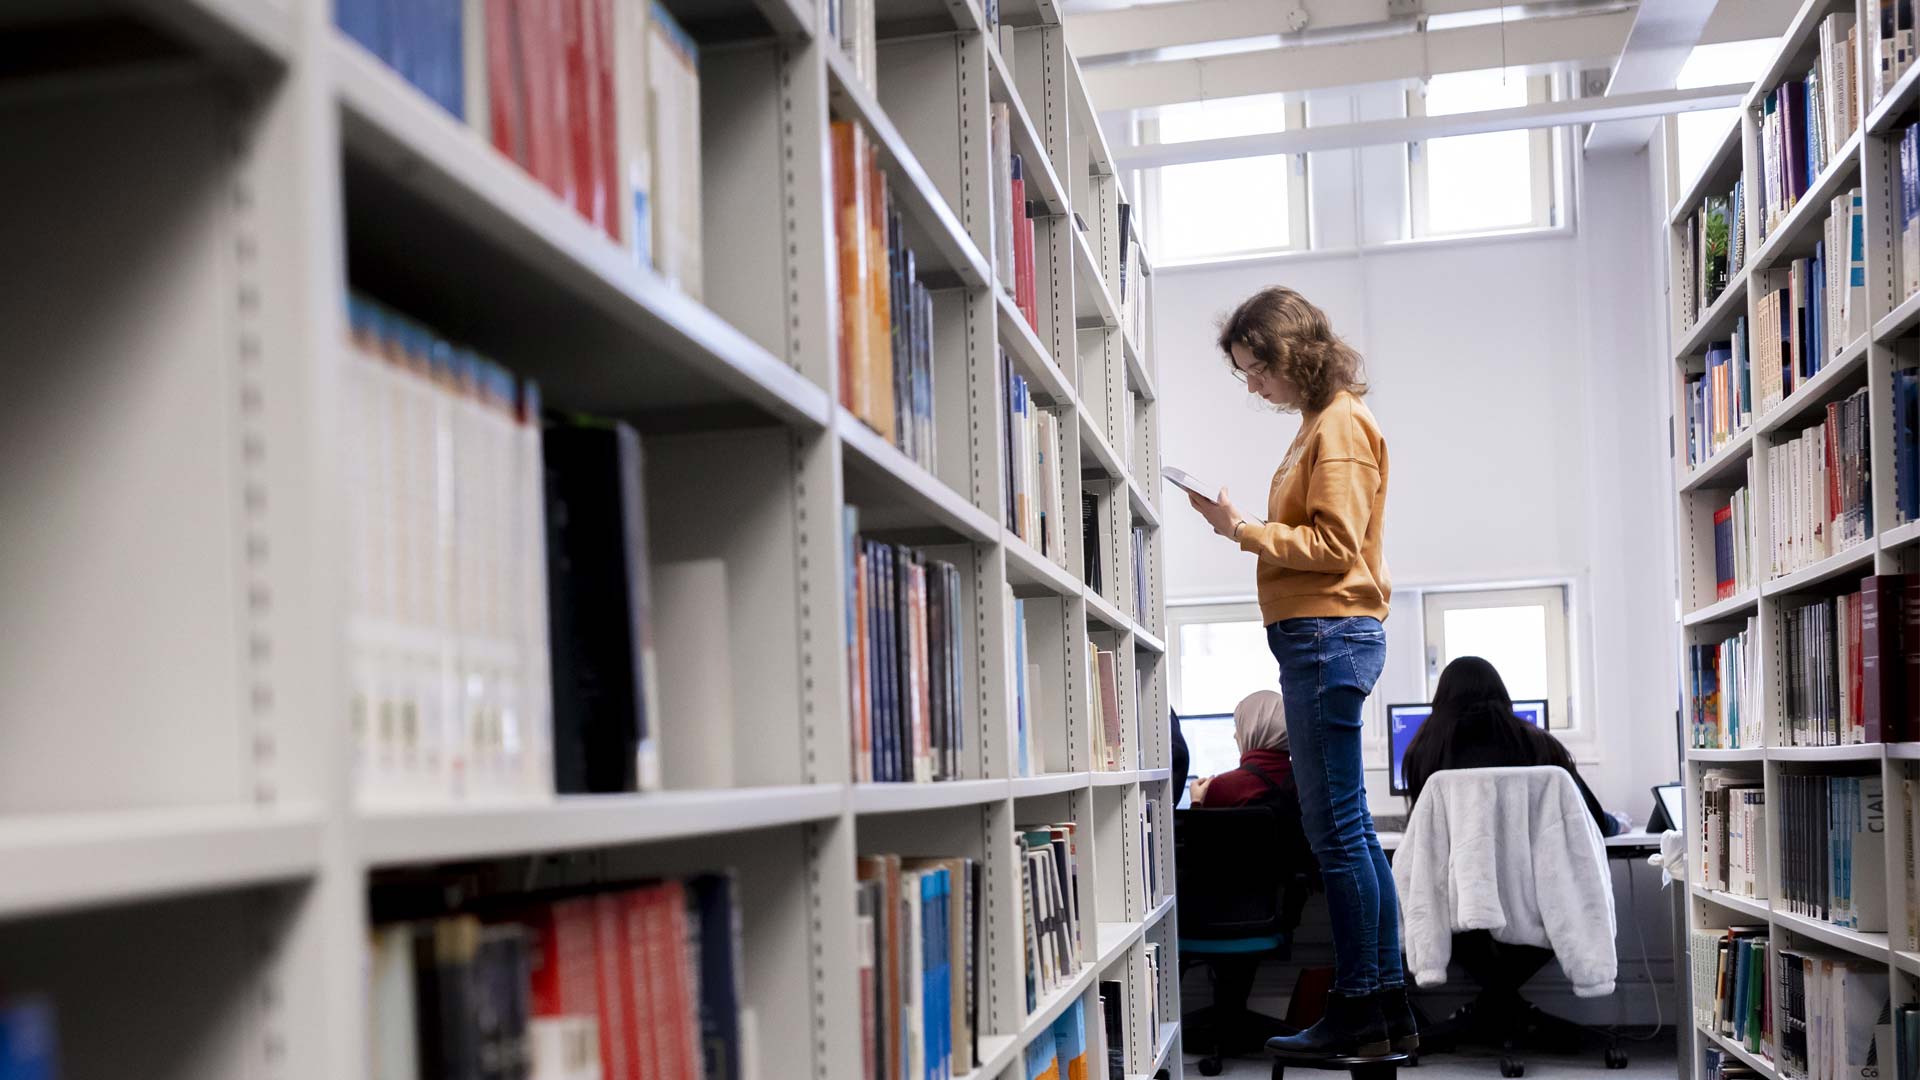 Student looking through the shelves in the library